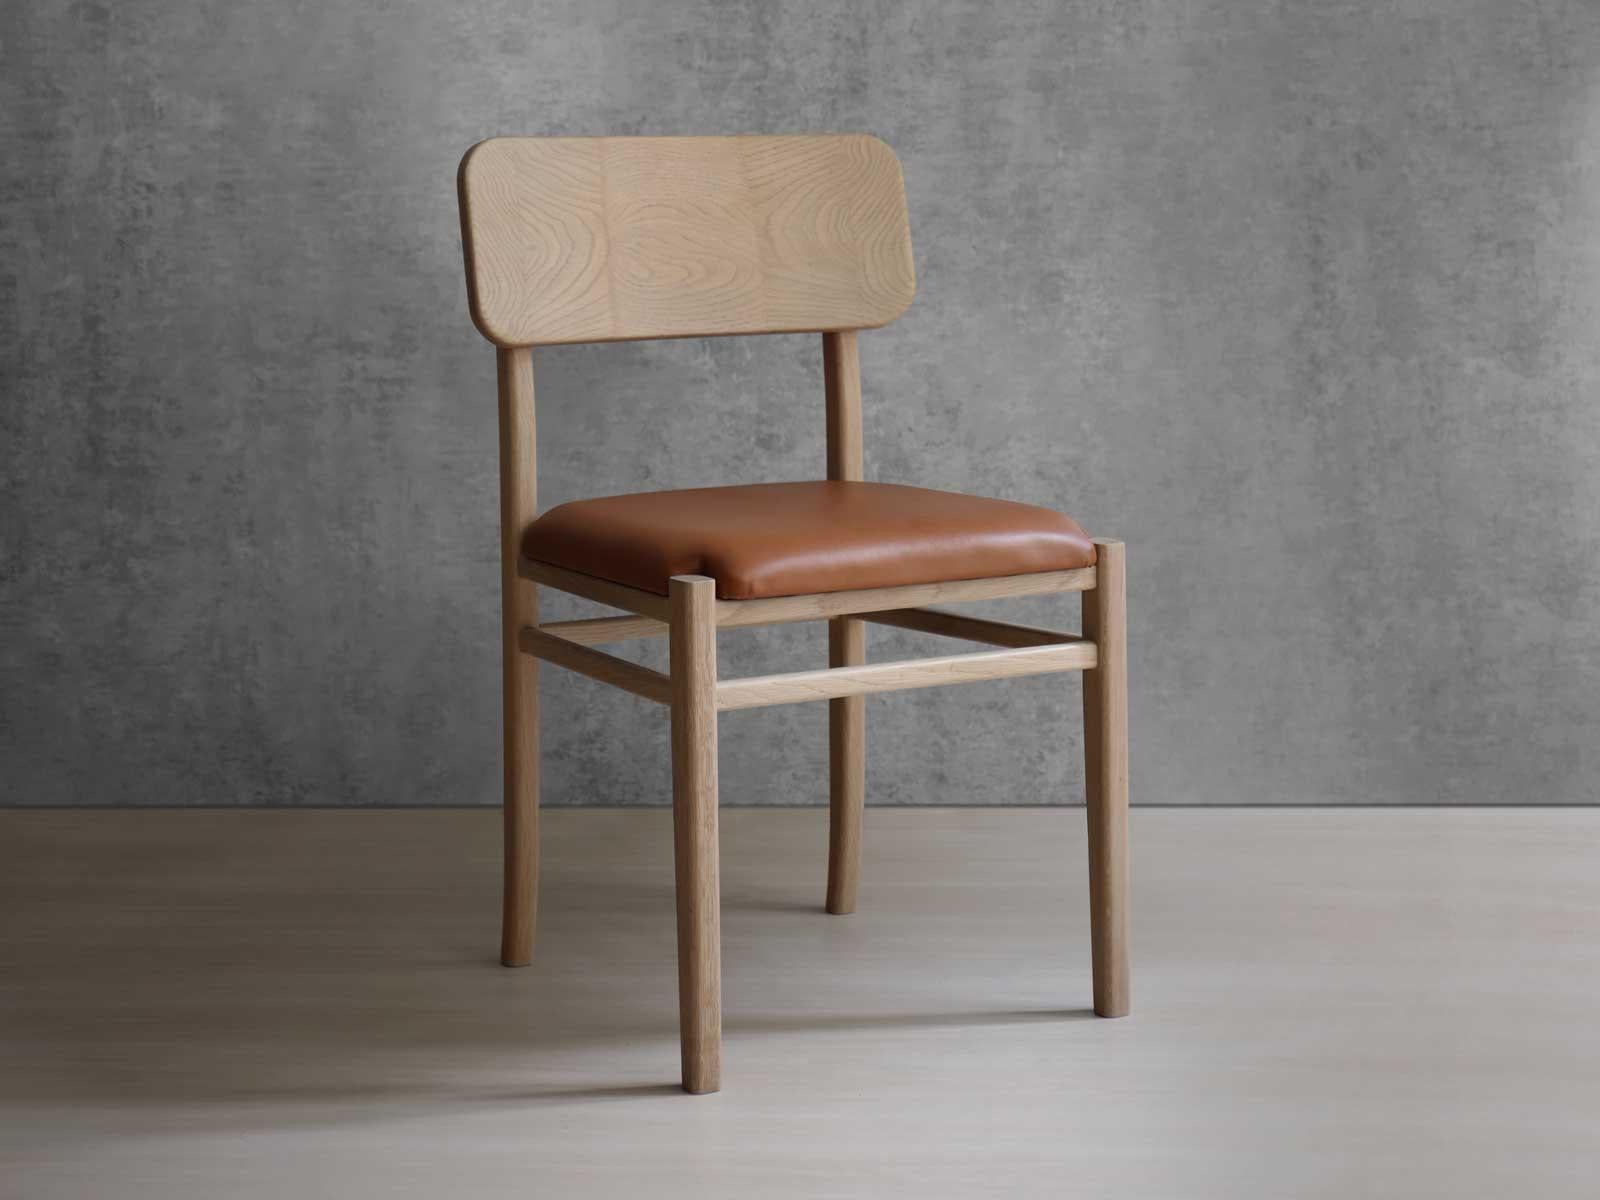 The Eleventh Chair is part of Noviembre collection, which offers a compelling range of furniture, inviting exploration of form, function, and the serene lines that define each piece. Inspired by Constantin Brancusi's artistic philosophy, the